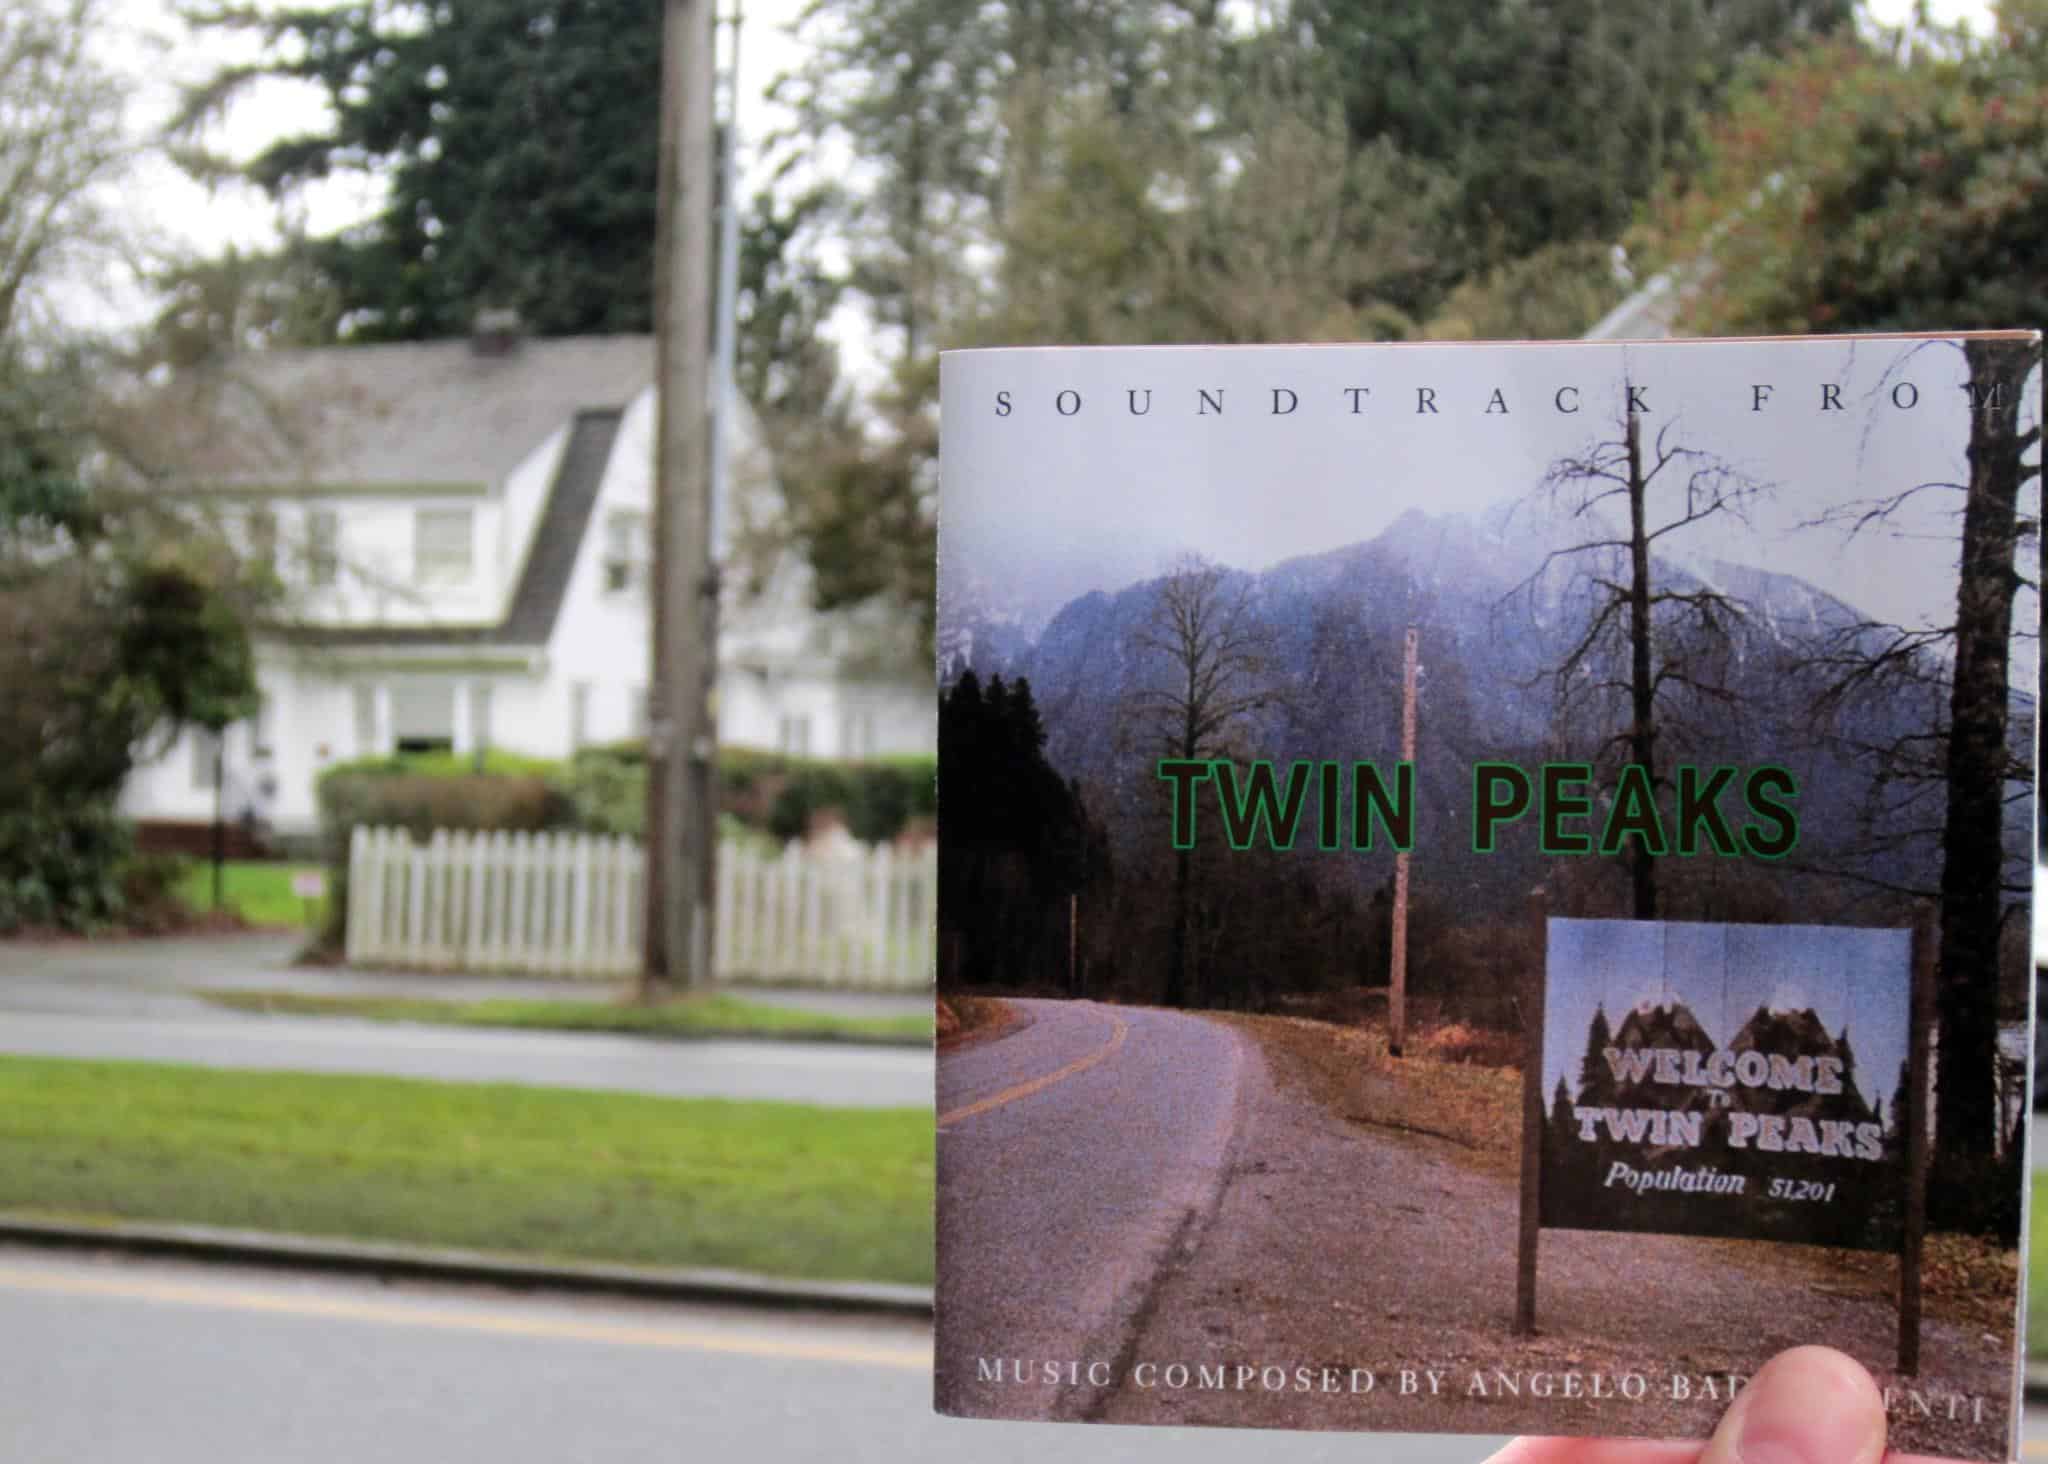 Diane, 11:30 AM, February 24th: The Welcome To Twin Peaks Project's ...